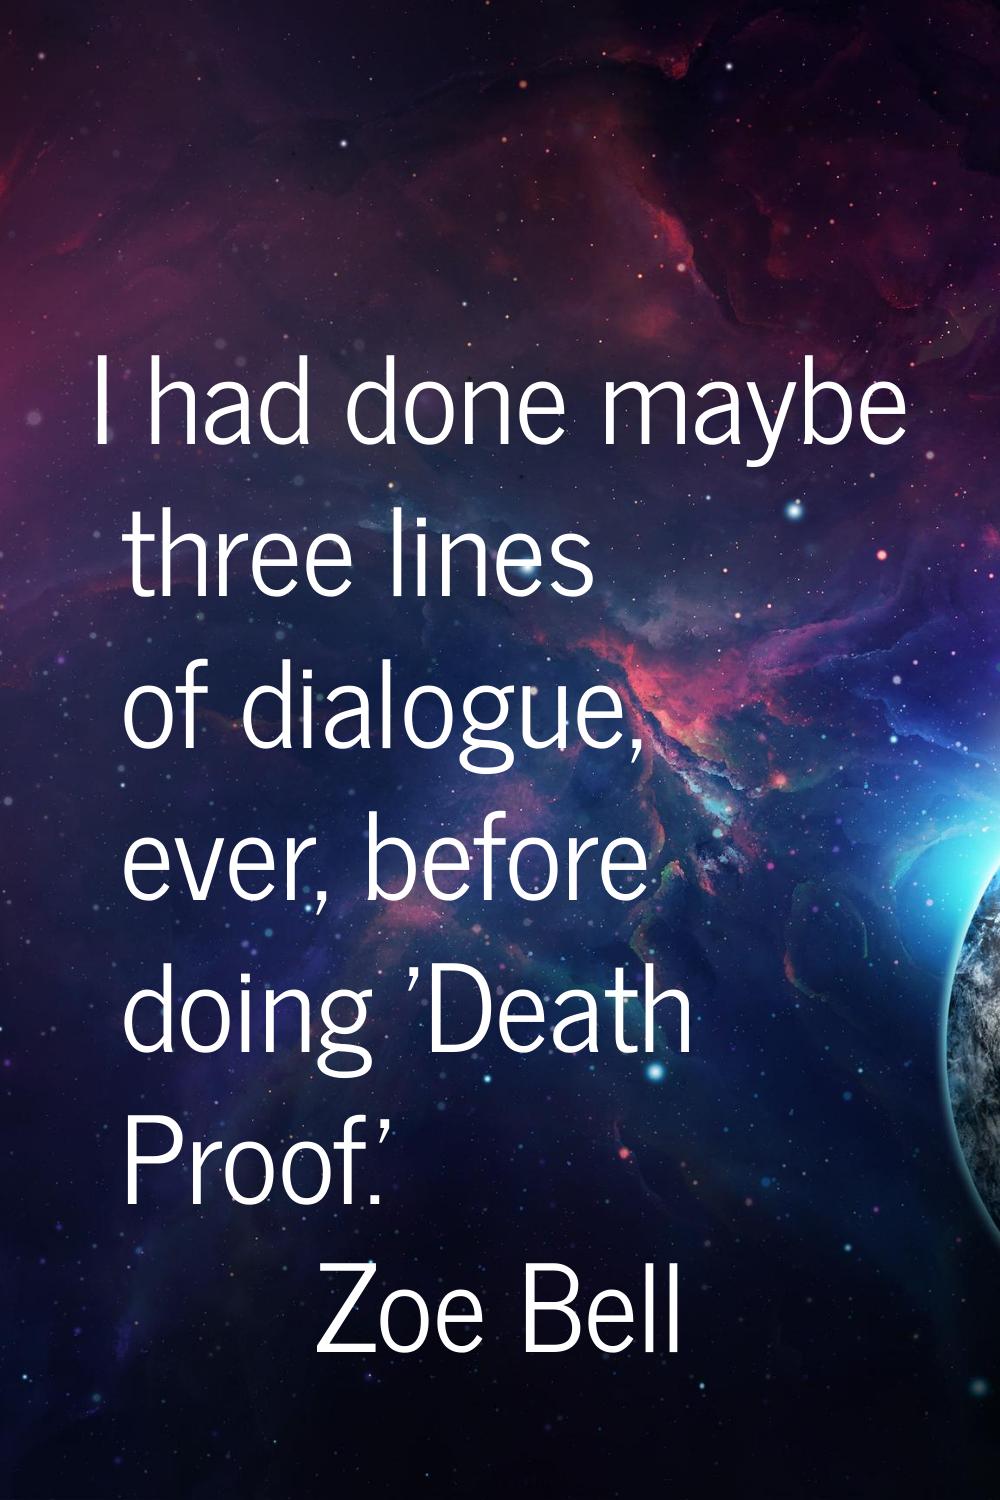 I had done maybe three lines of dialogue, ever, before doing 'Death Proof.'